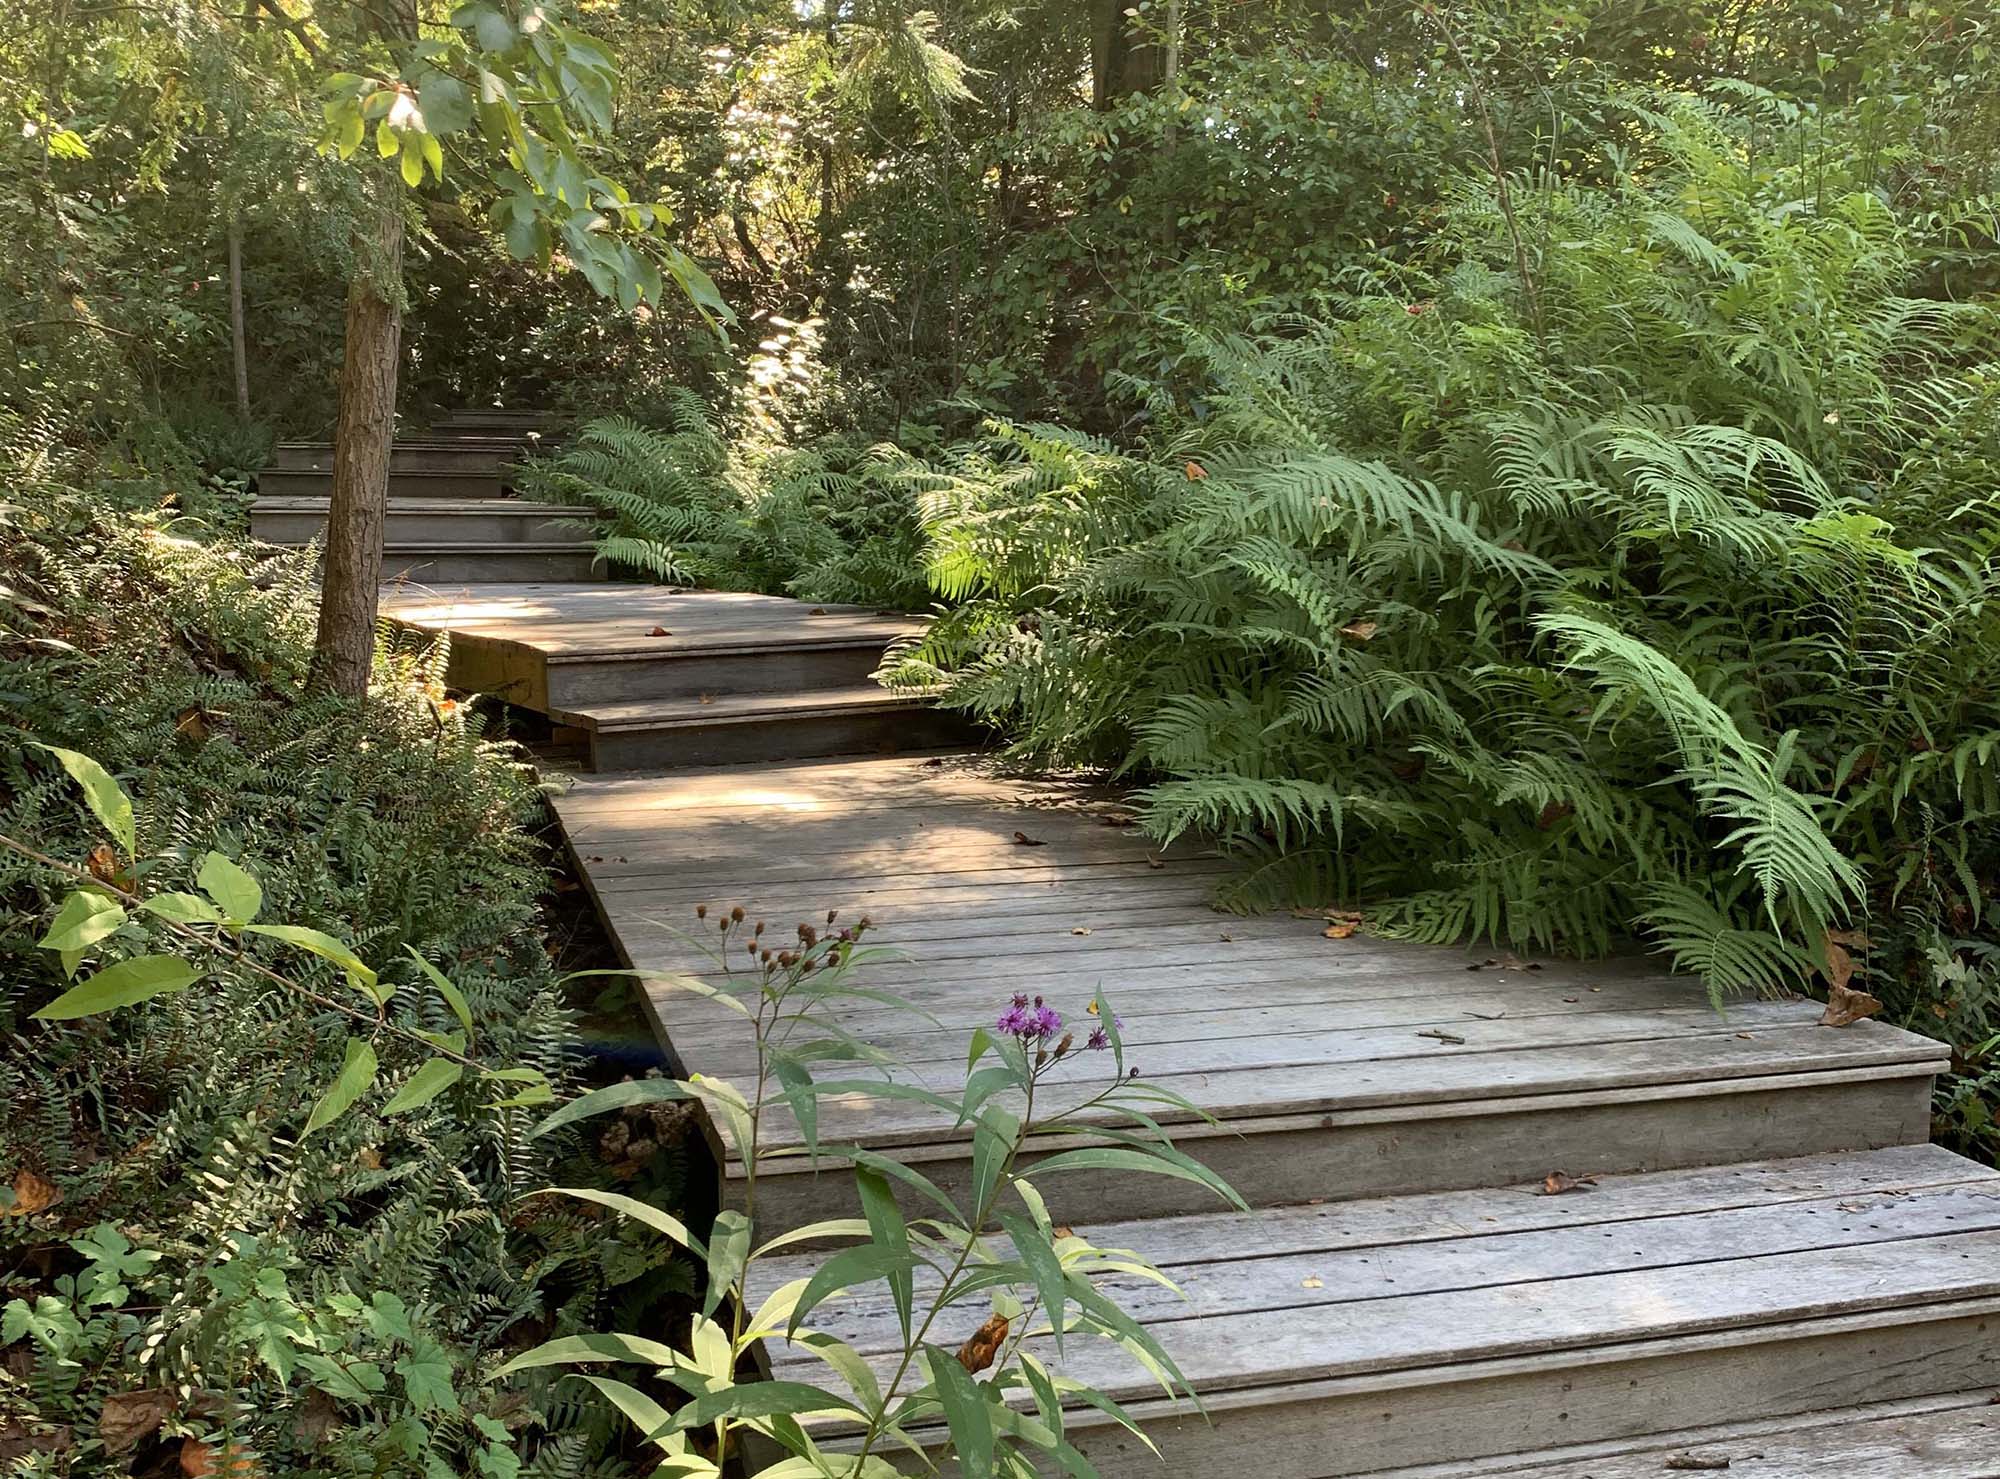 Wooden boardwalk stairs through the Blomquist Garden of Native Plants, with purple volunteer ironweed flowers in the foreground.